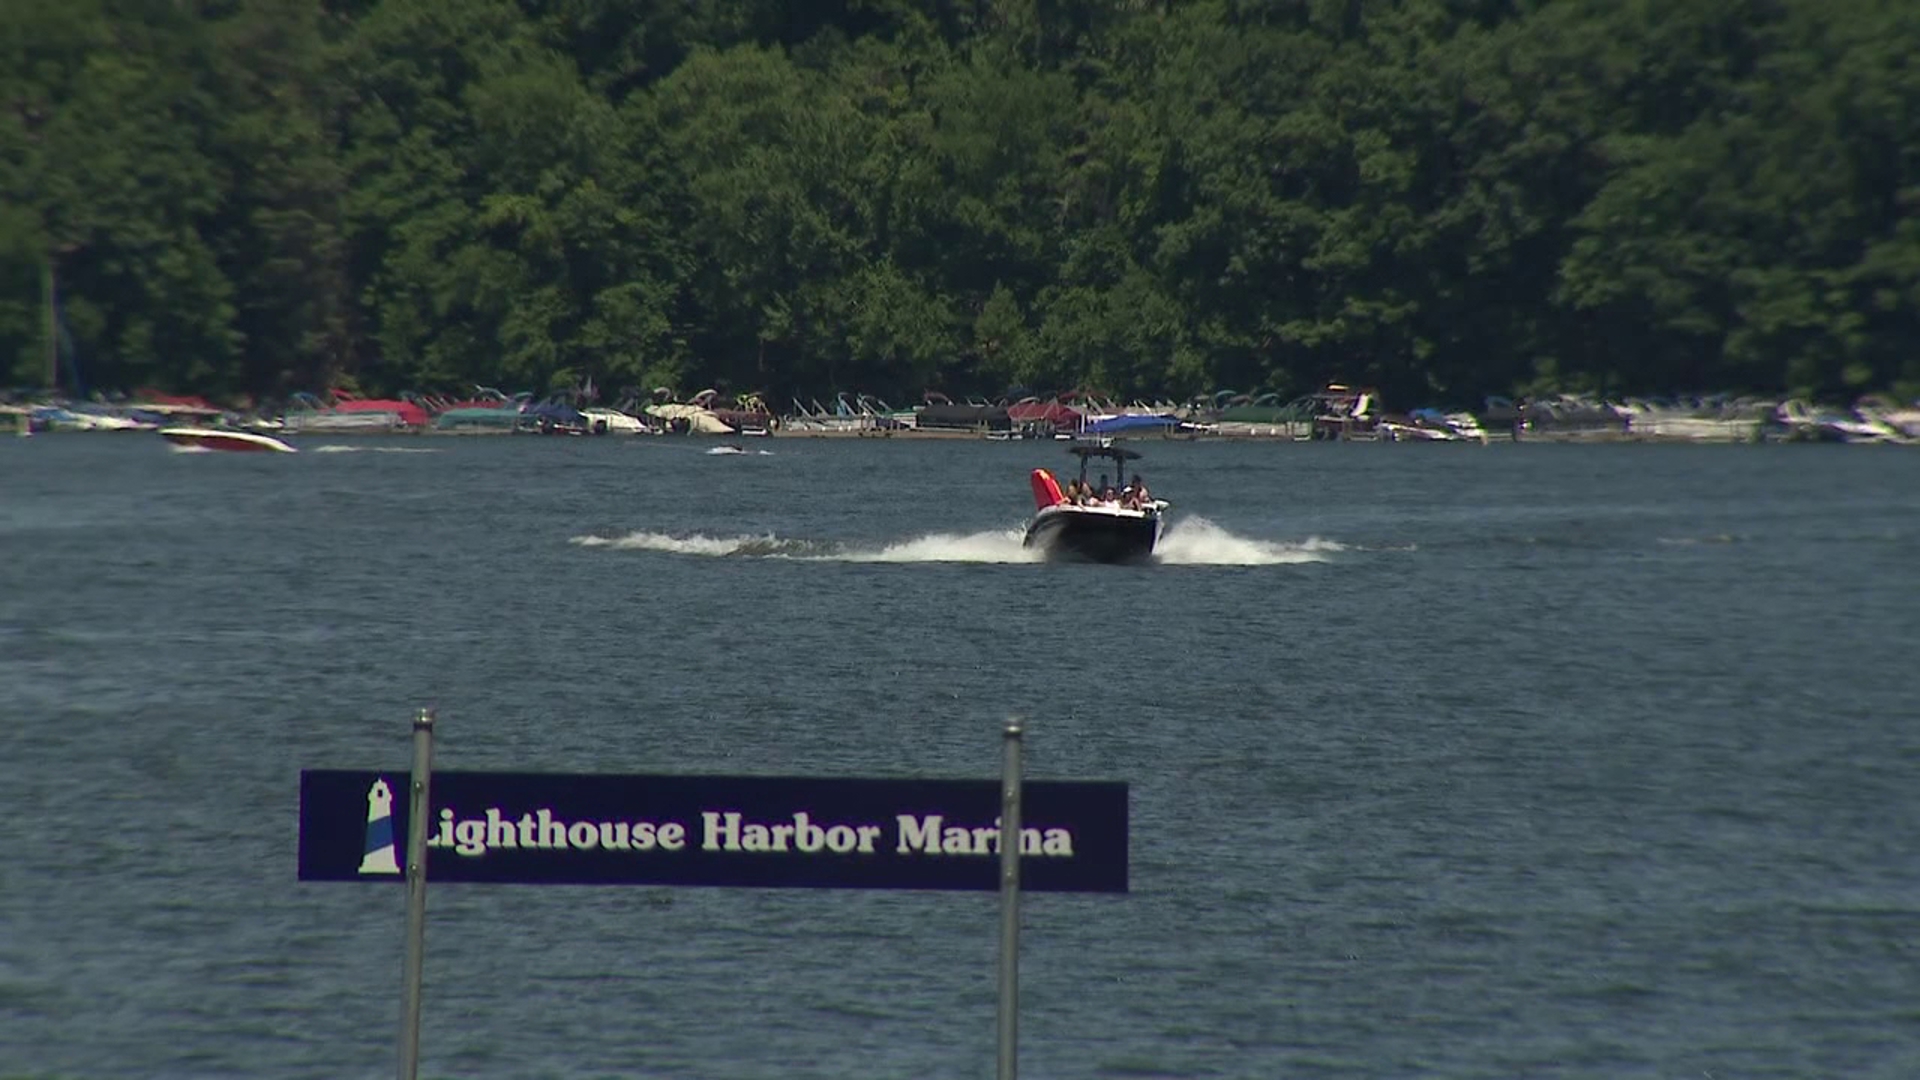 The holiday week is a busy time for marinas on Lake Wallenpaupack.